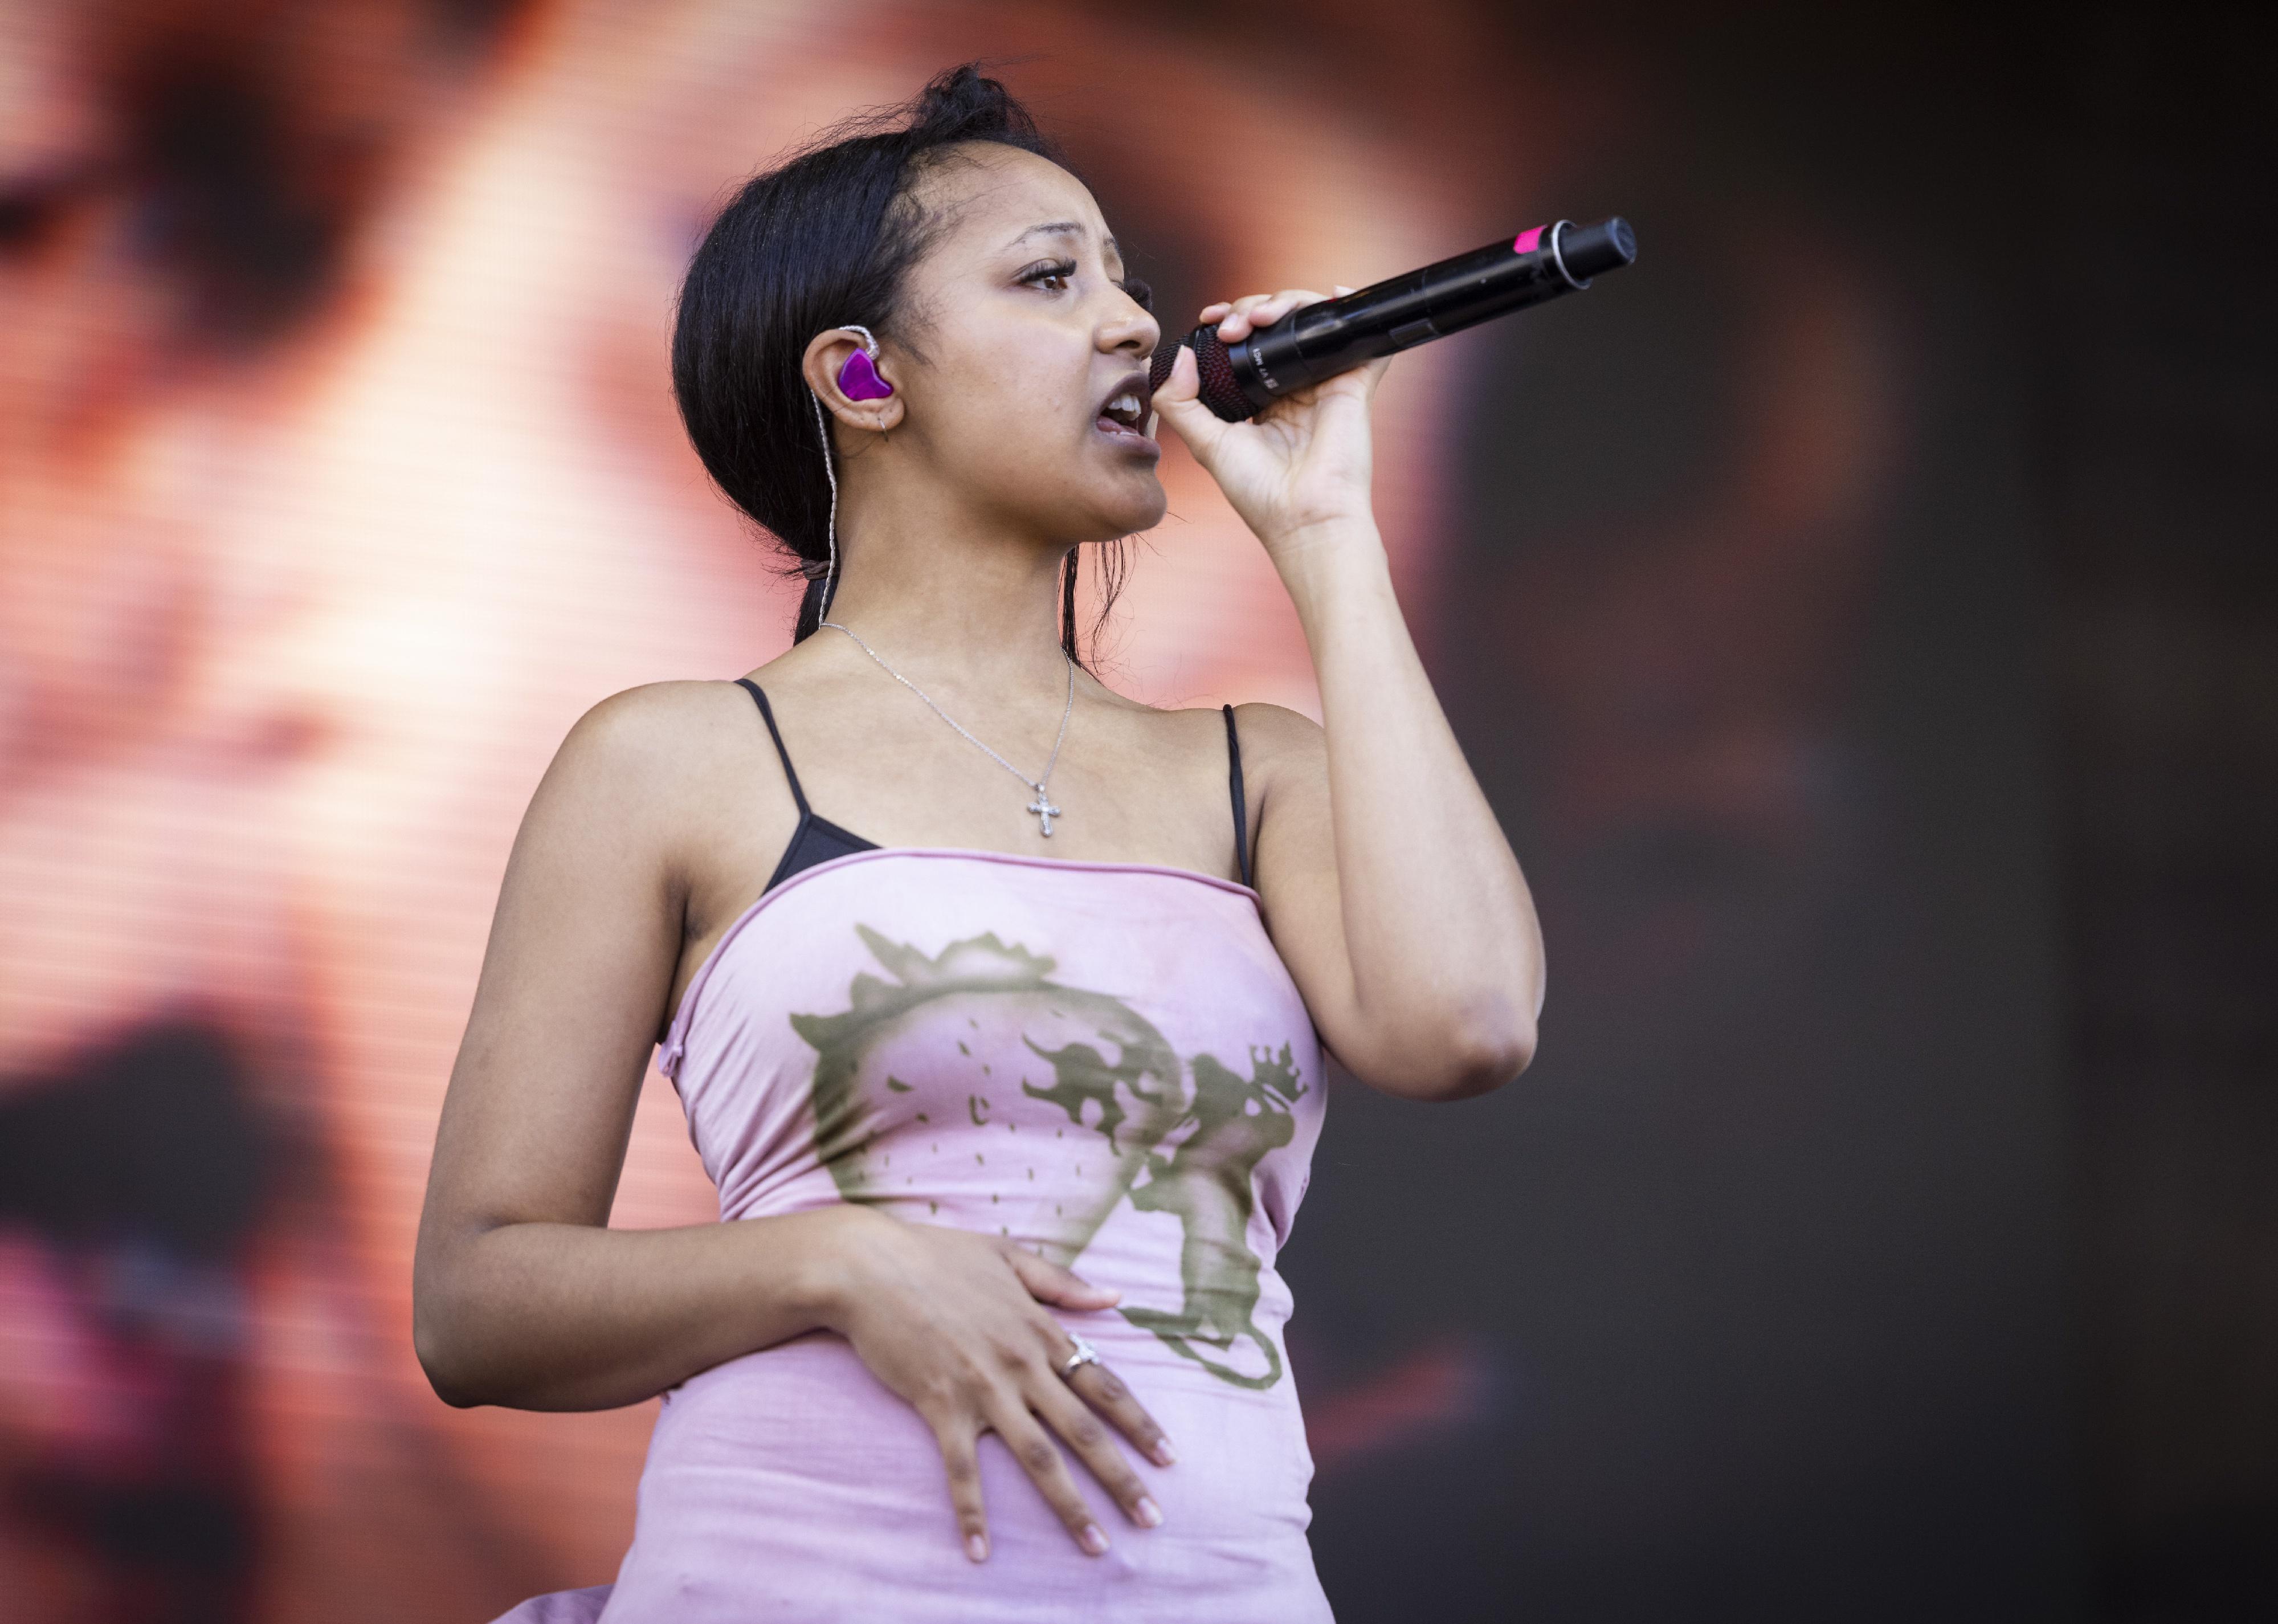 Pinkpantheress performing onstage in a pink top.